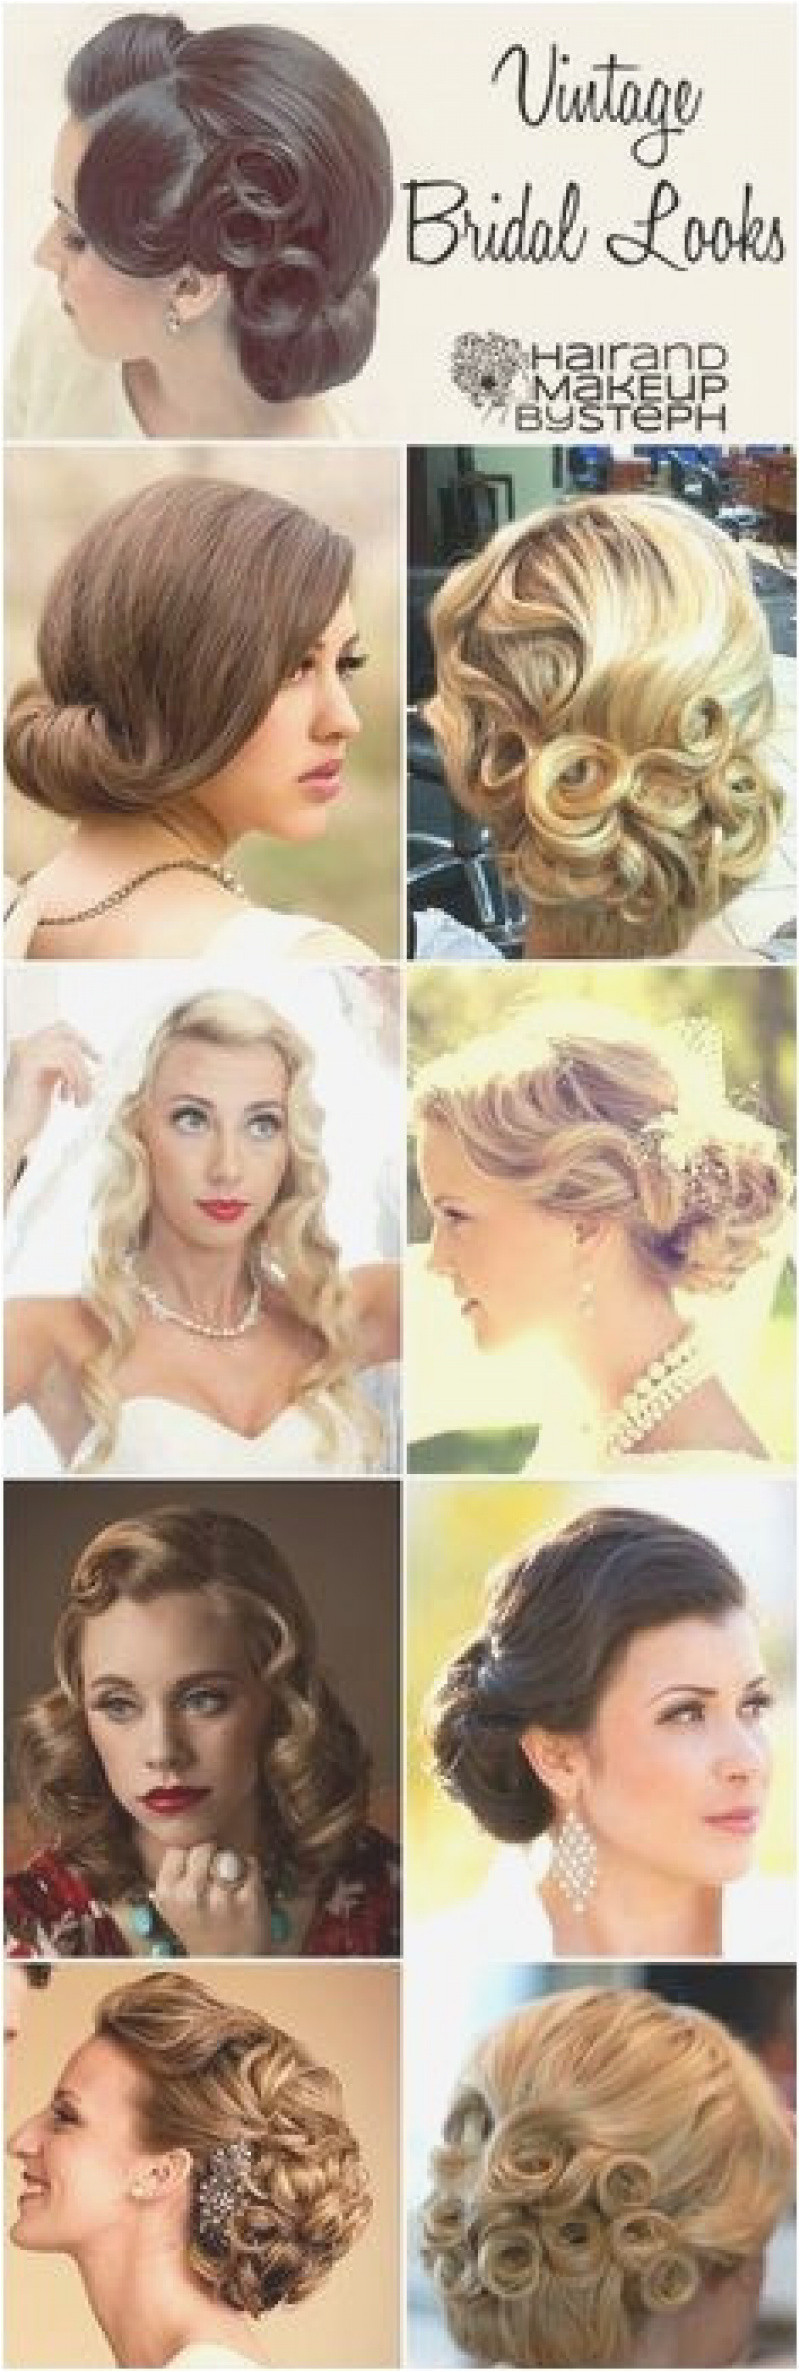 Updo Wedding Hairstyles Bridesmaids Lovely Easy Do It Yourself Hairstyles Elegant Lehenga Hairstyle 0d Updos